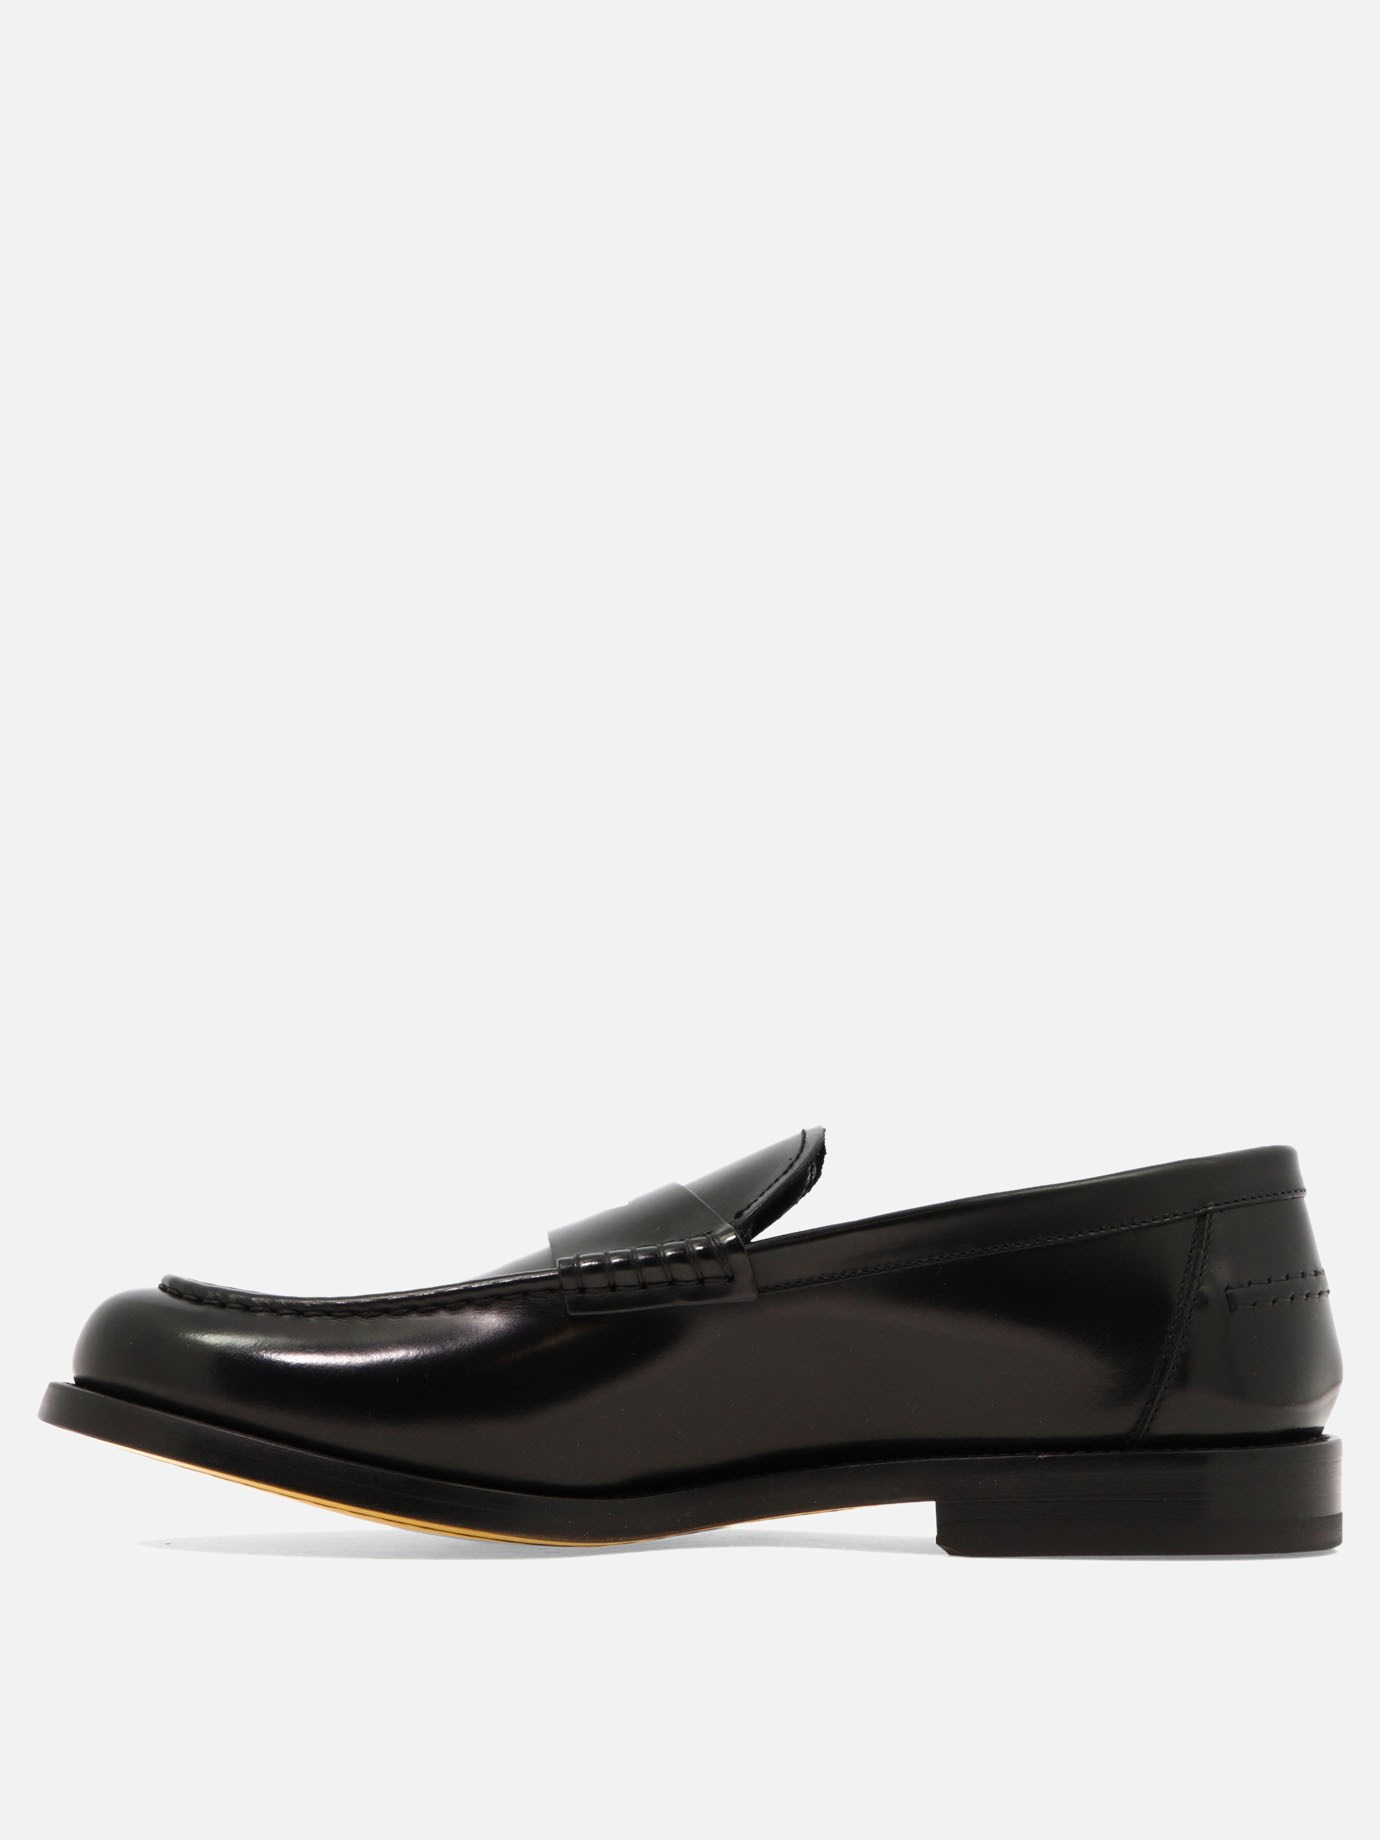  Penny  loafers by Doucal's